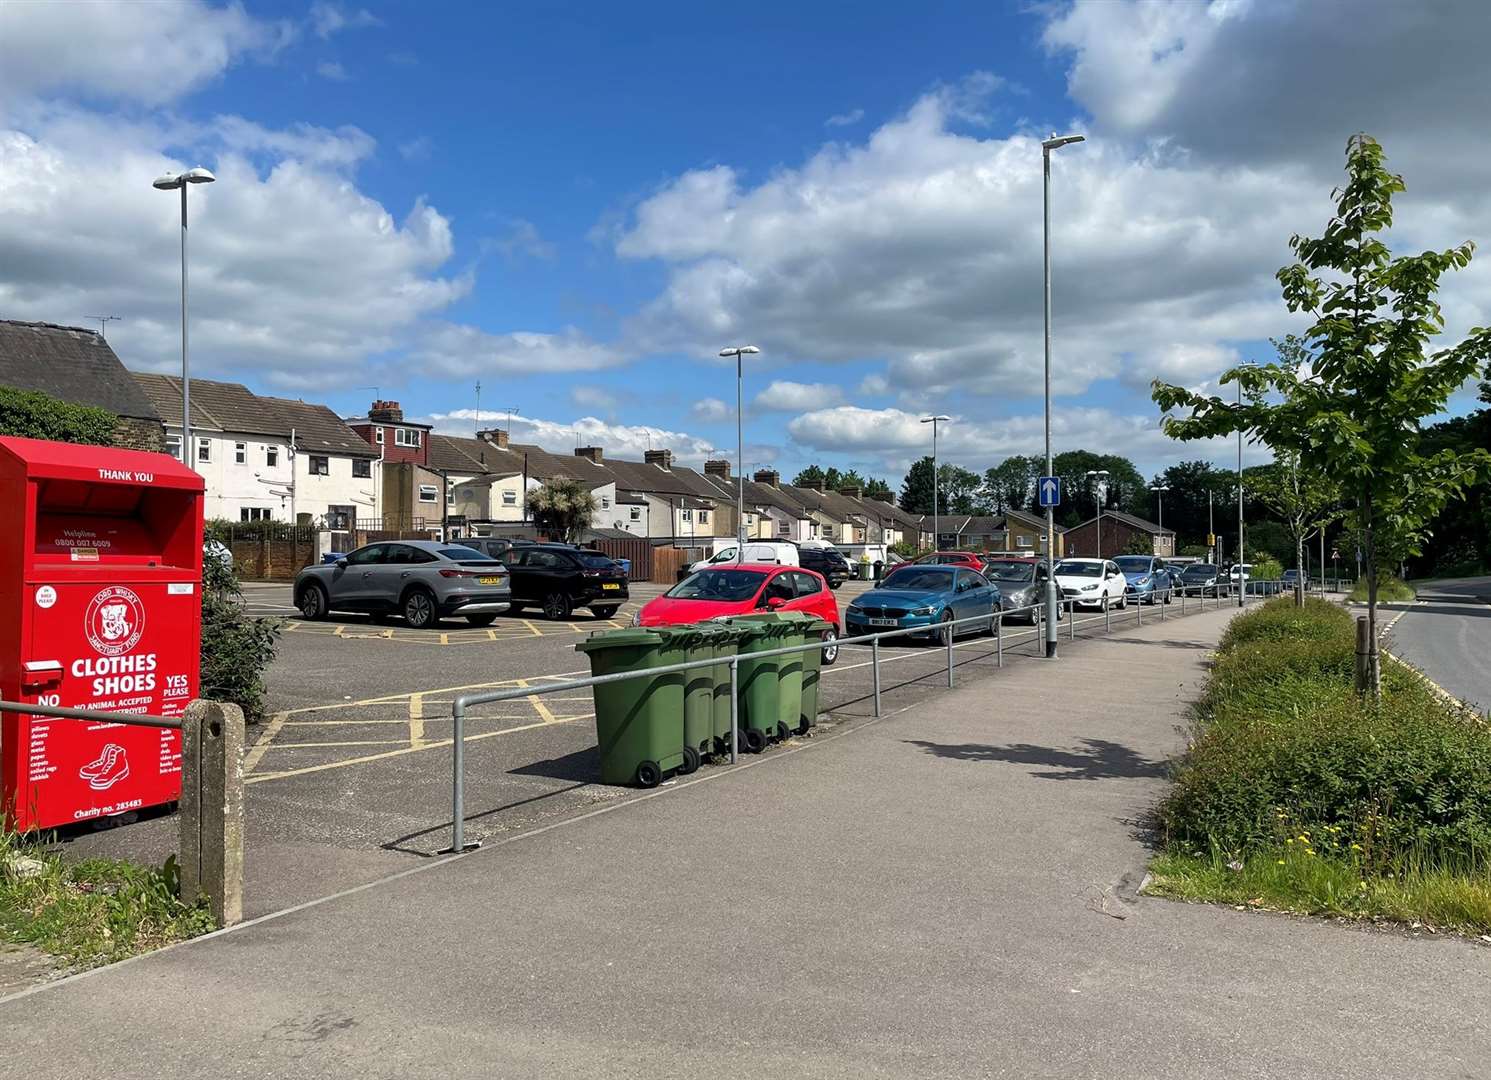 The Cockleshell Walk car park which can be accessed from the one-way system in Sittingbourne town centre. Picture: Joe Crossley